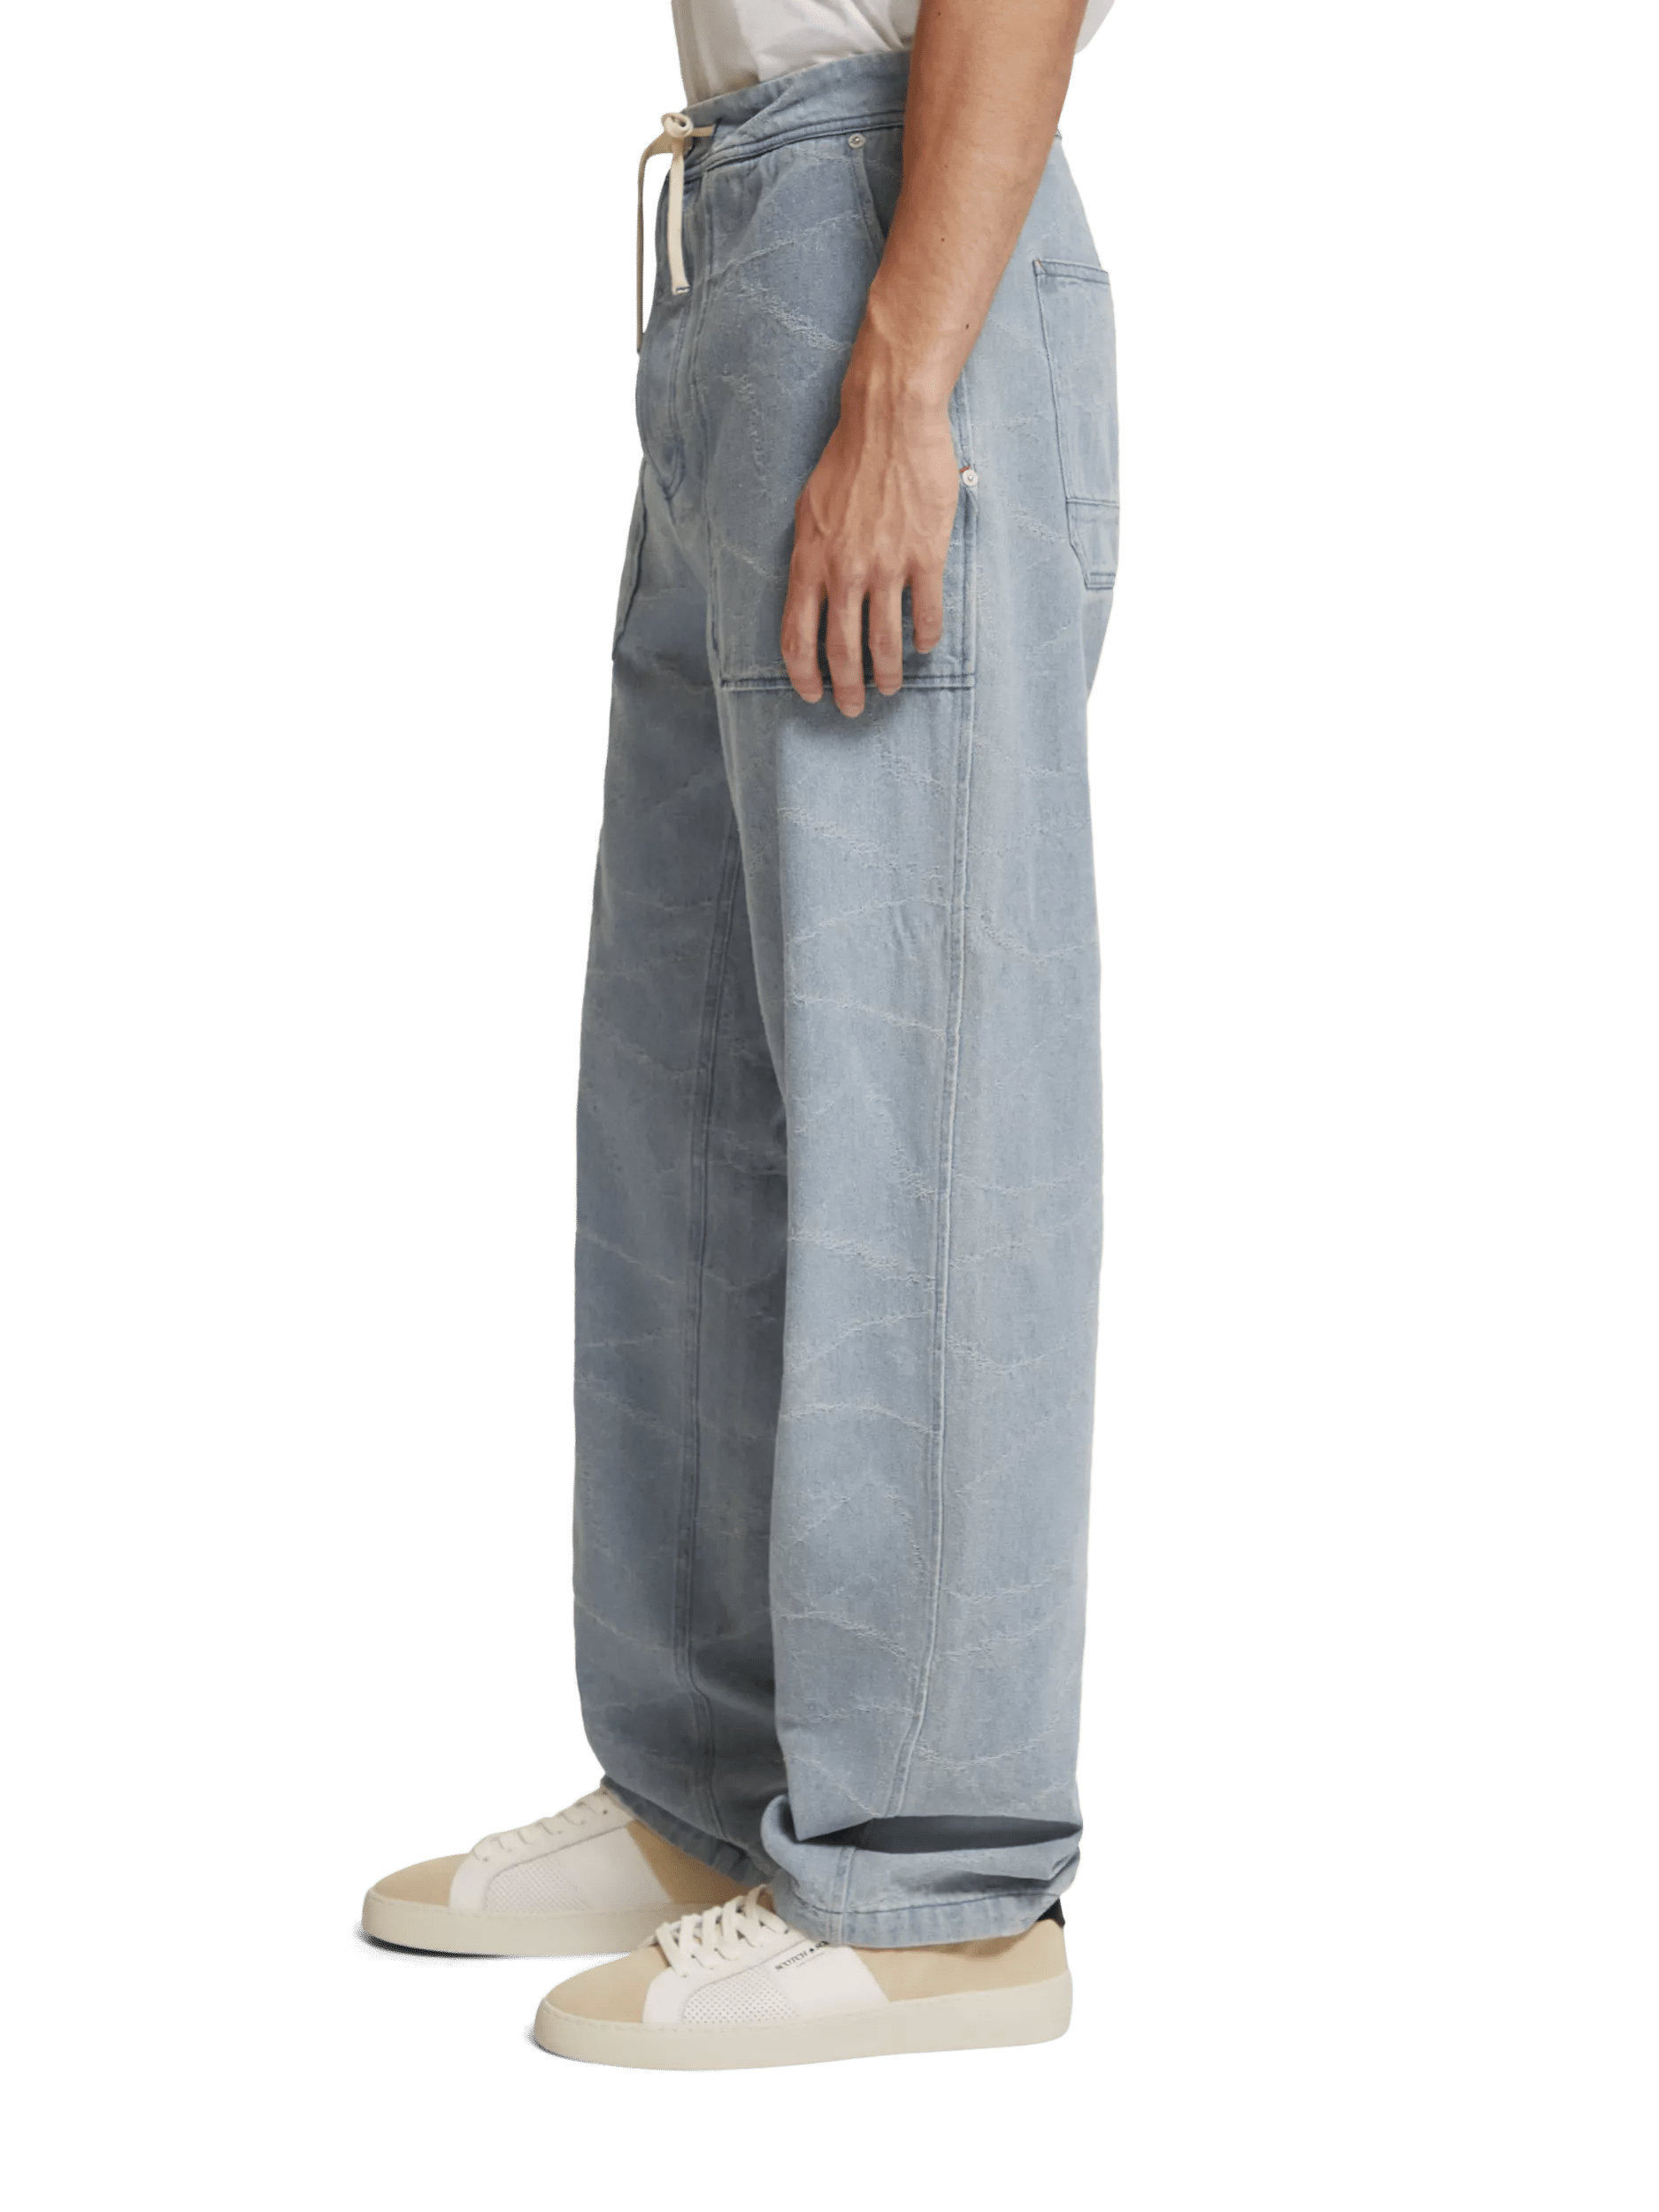 Scotch & Soda The Verve workwear utility trousers FIT-SDE